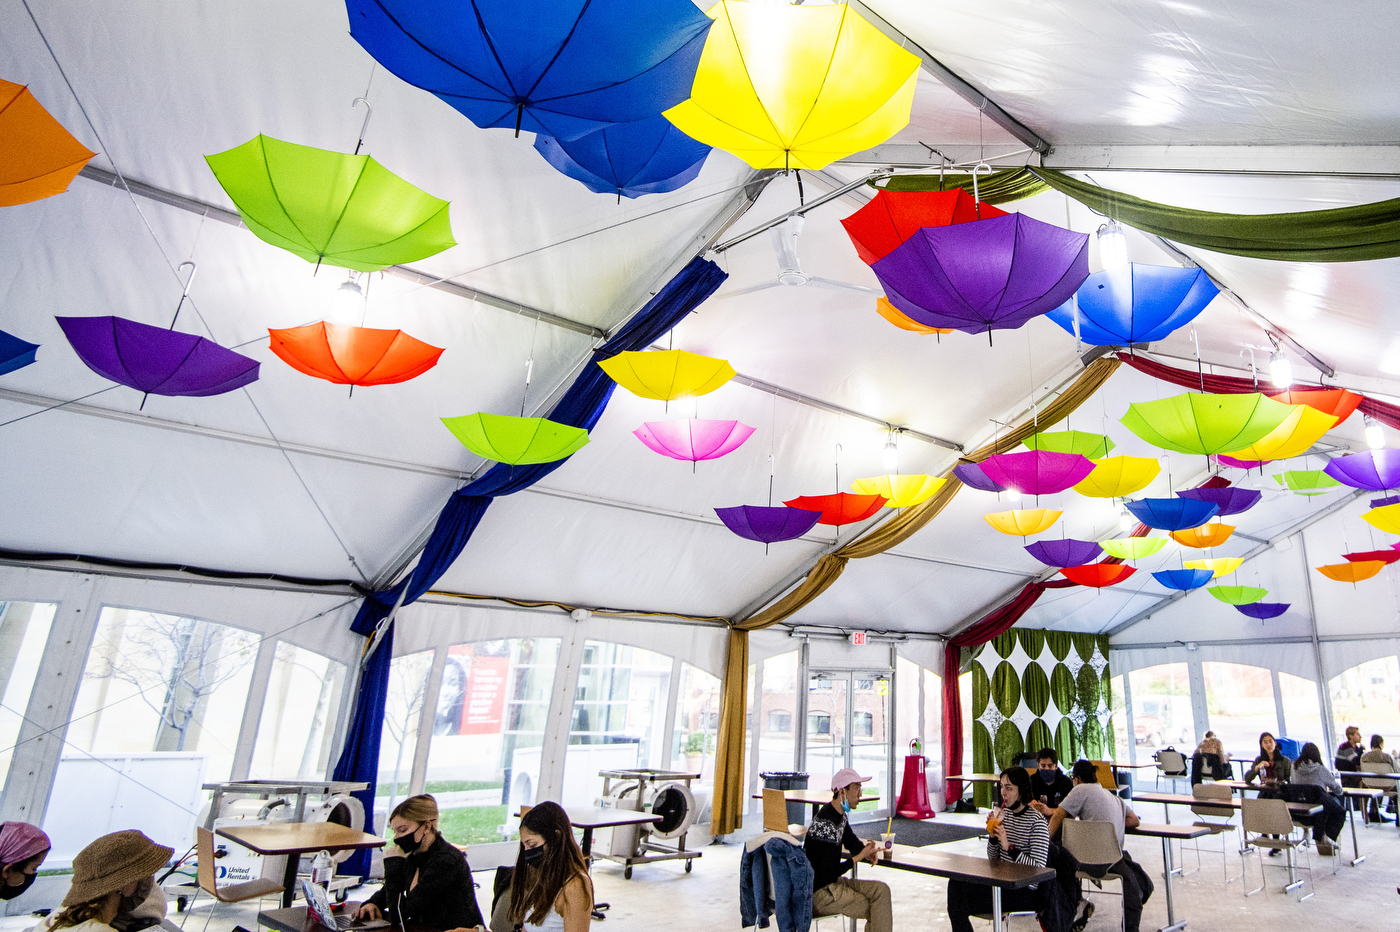 Colorful umbrella-shaped light fixtures adorn the ceiling of a dining tent outside the West Village complex on the Boston campus. Photo by Matthew Modoono/Northeastern University